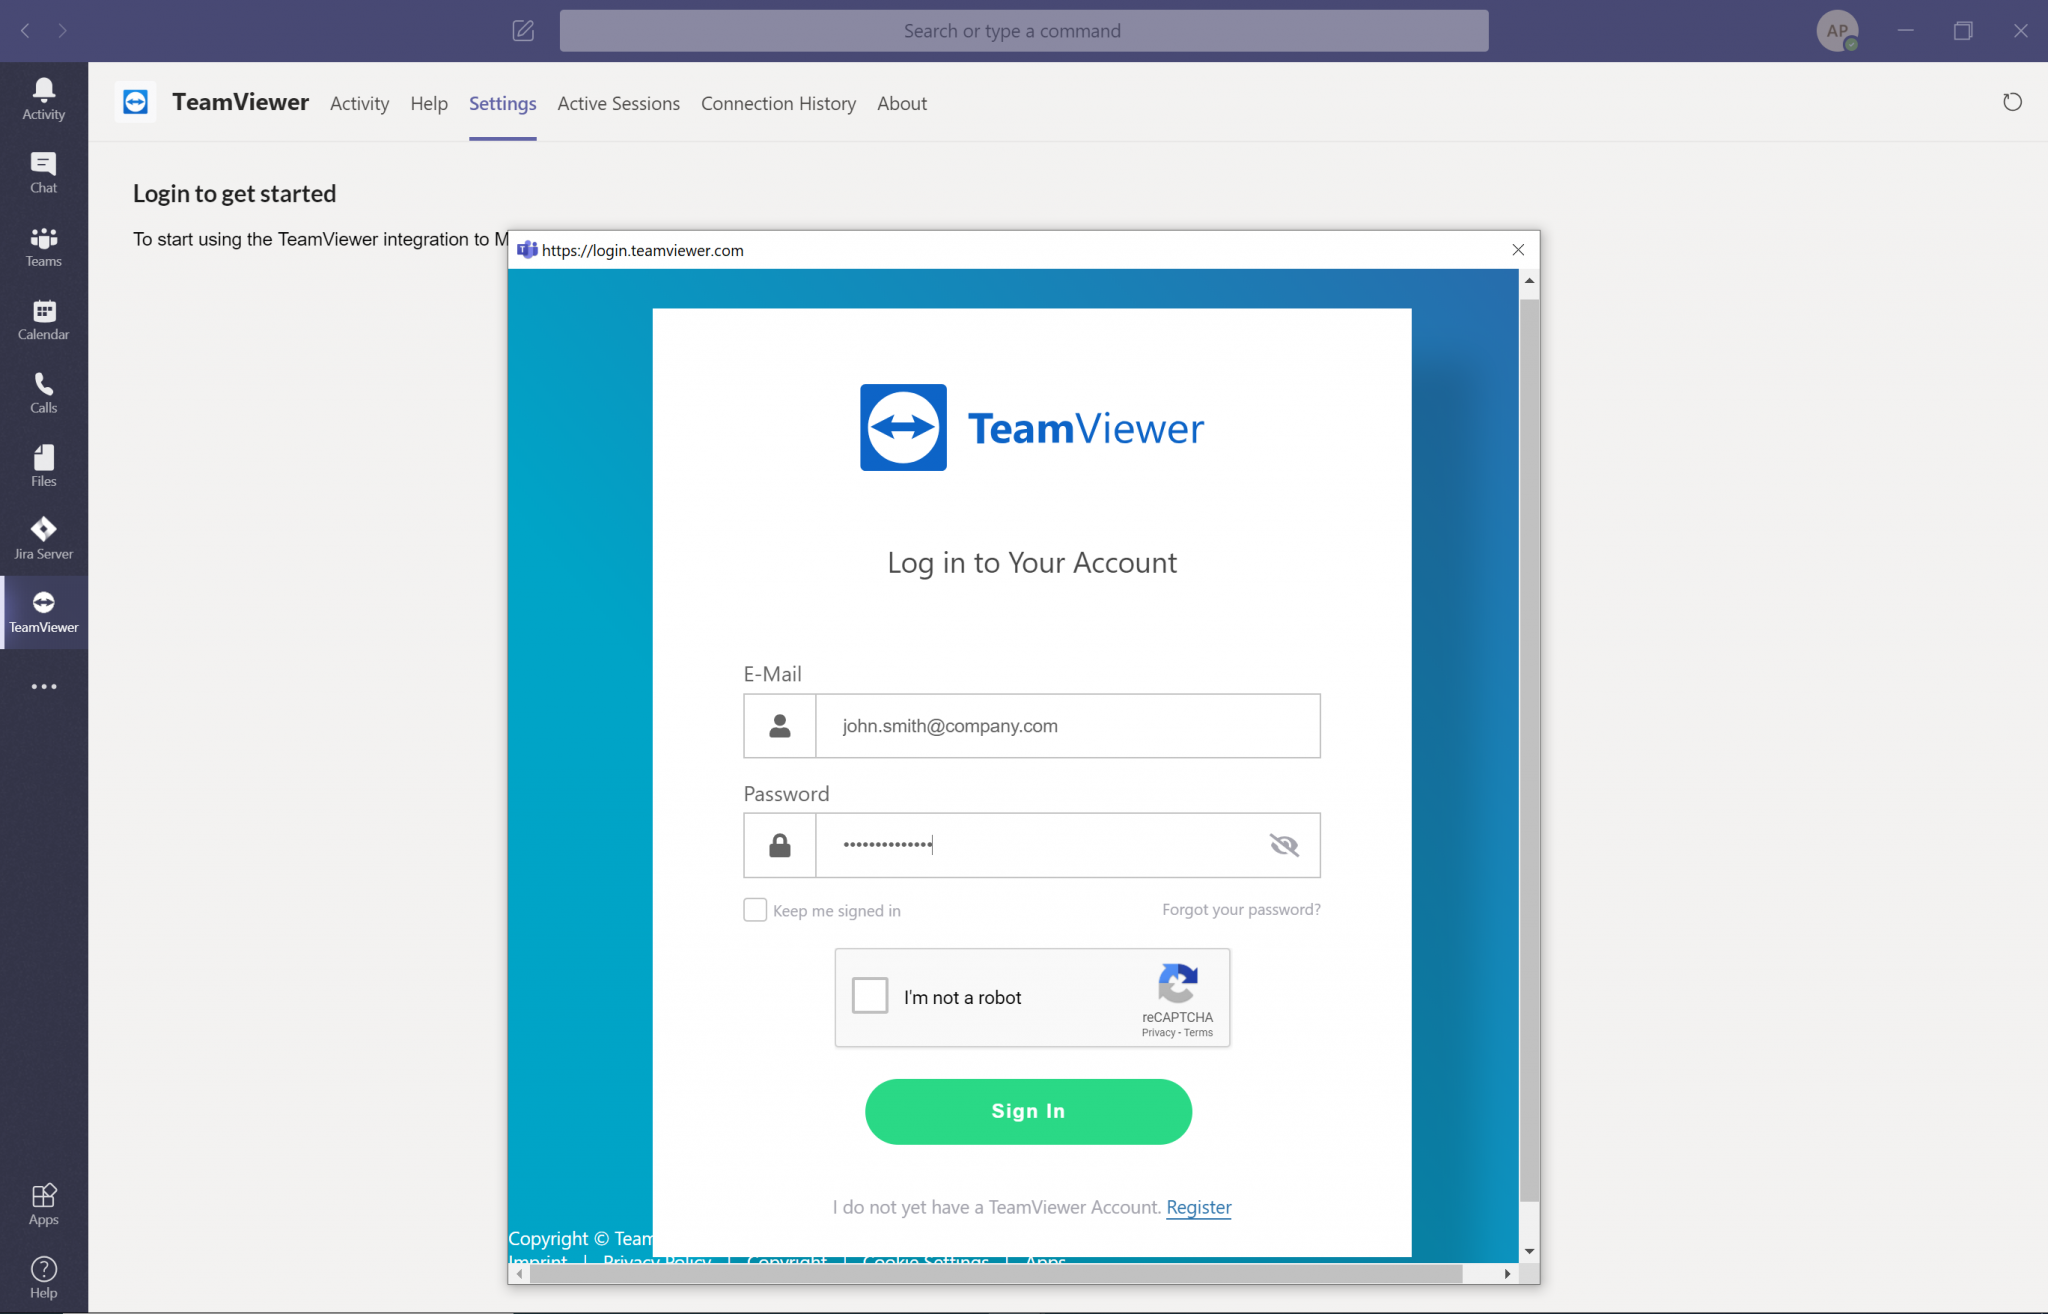 microsoft teams download instructions